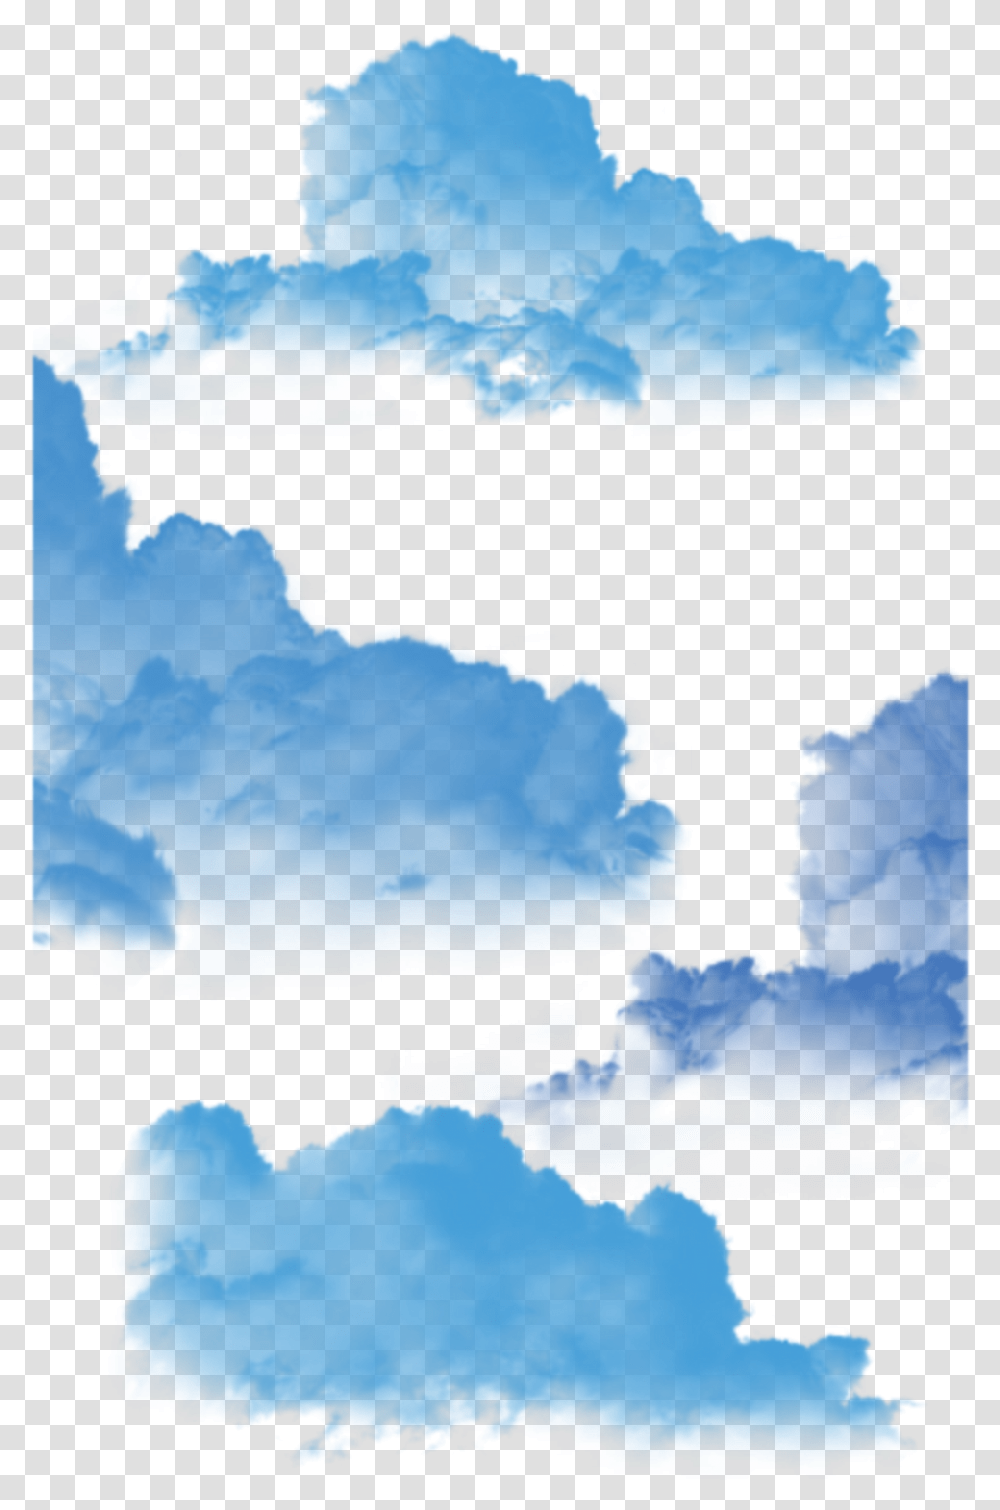 Clouds Nubes Art Arte Painting Aesthetic Tumblr Aesthetic Painted Blue Clouds, Land, Outdoors, Nature, Water Transparent Png